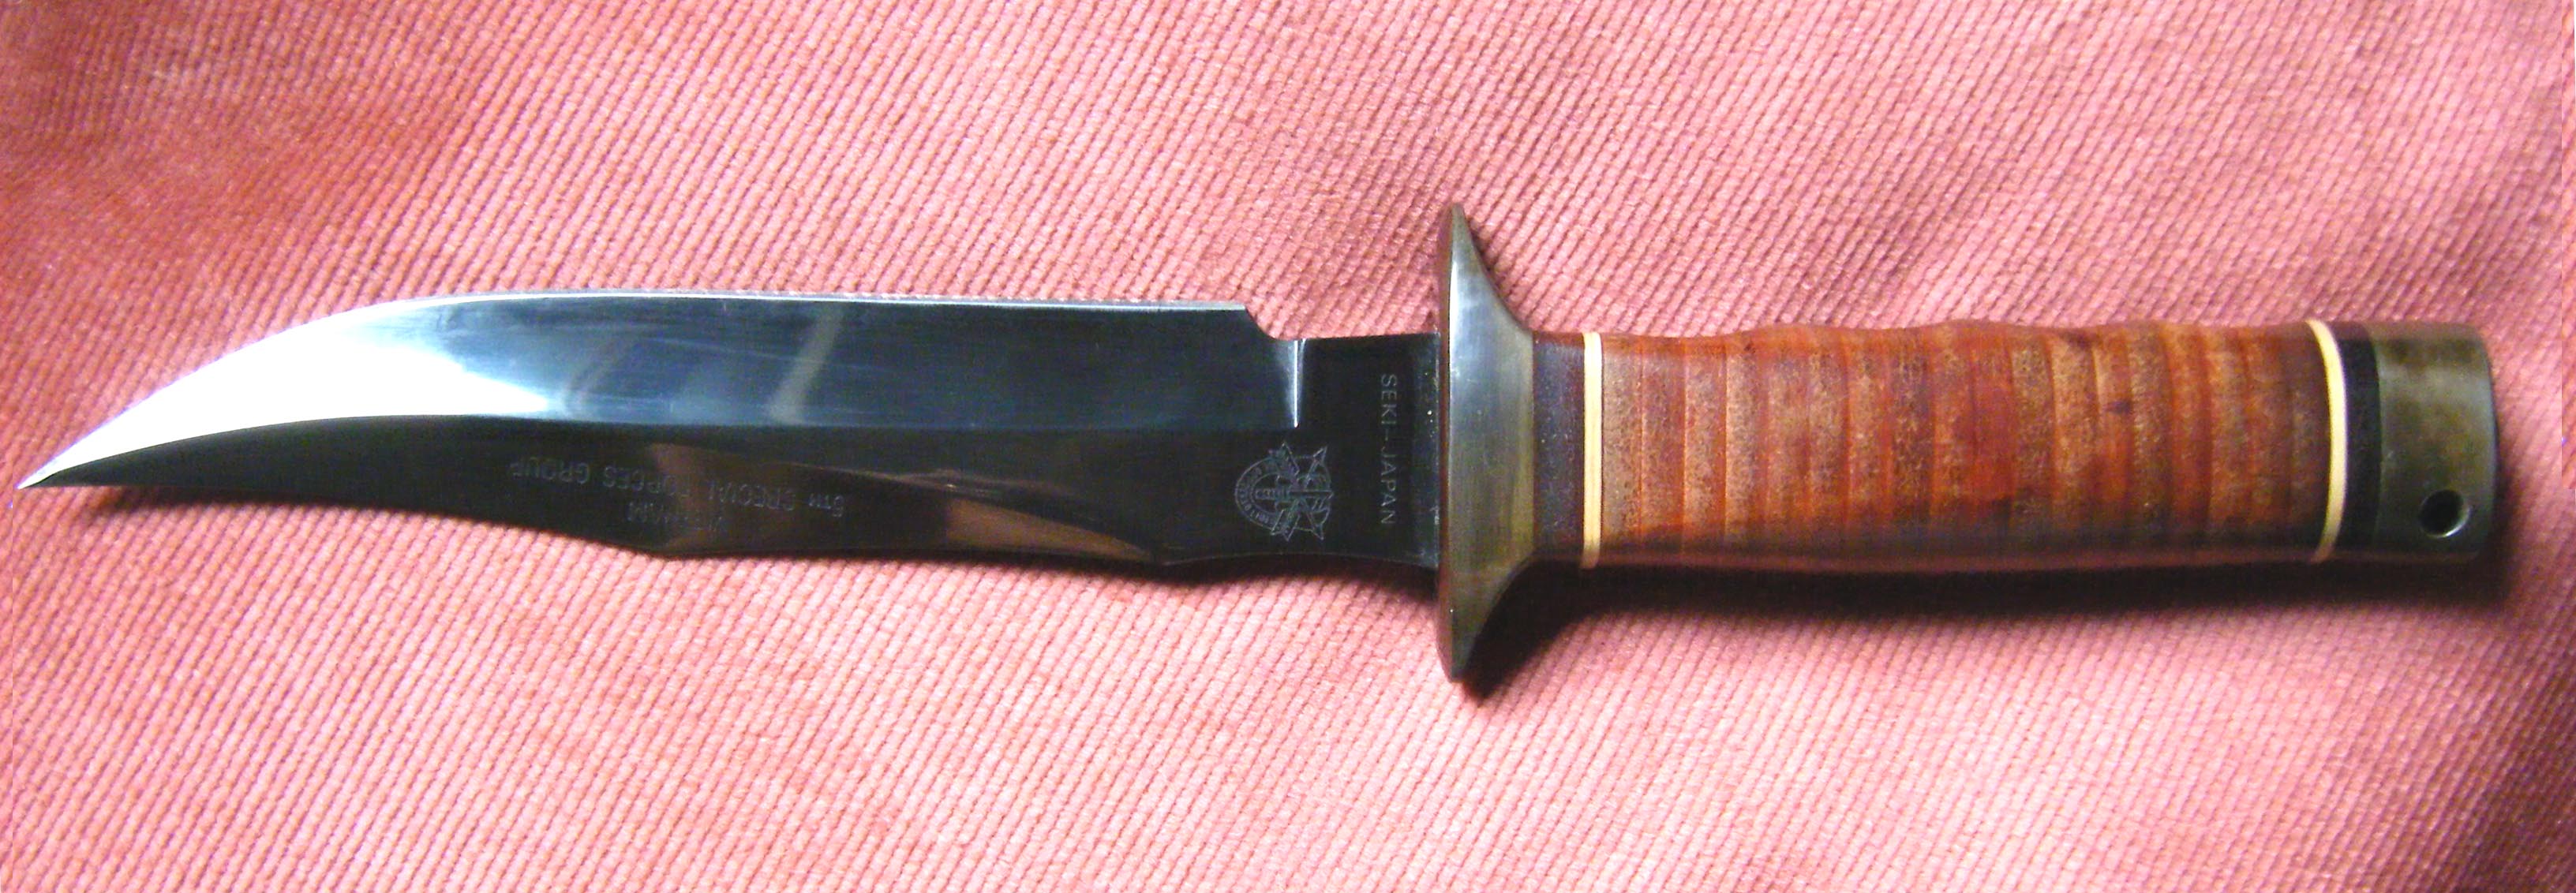 Well-aged S1 Bowie with tarnished guard. (Photo:"Ricce")